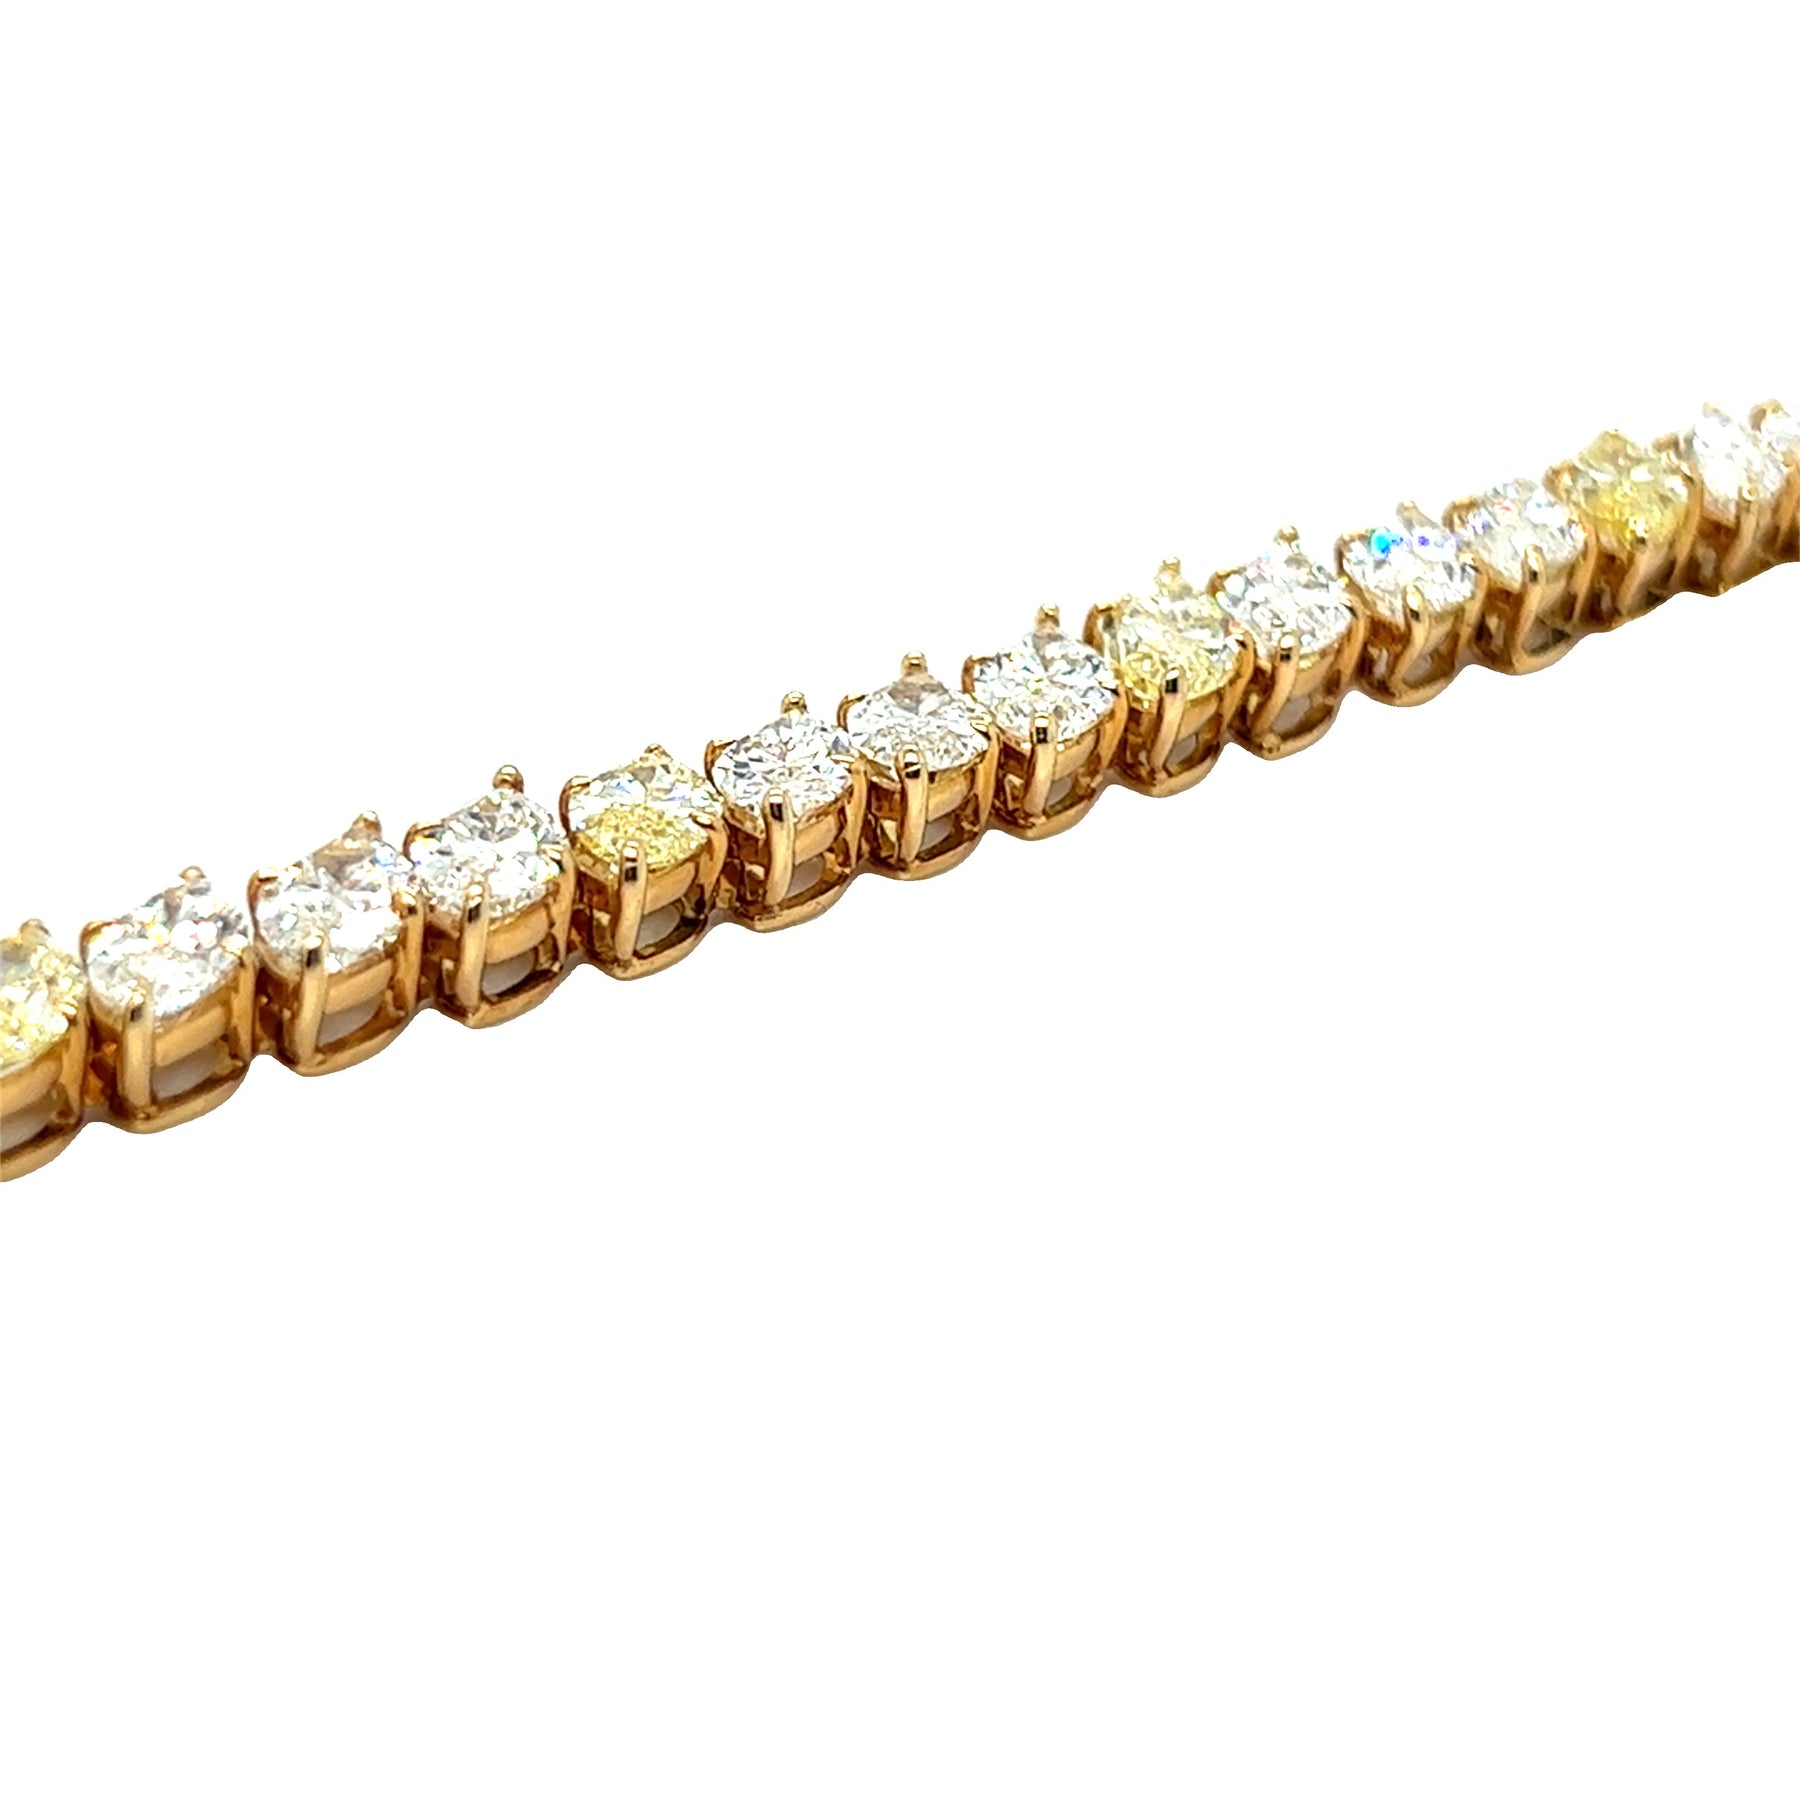 Sold at Auction: Harry Winston Gold, Cabochon Ruby and Diamond Bracelet